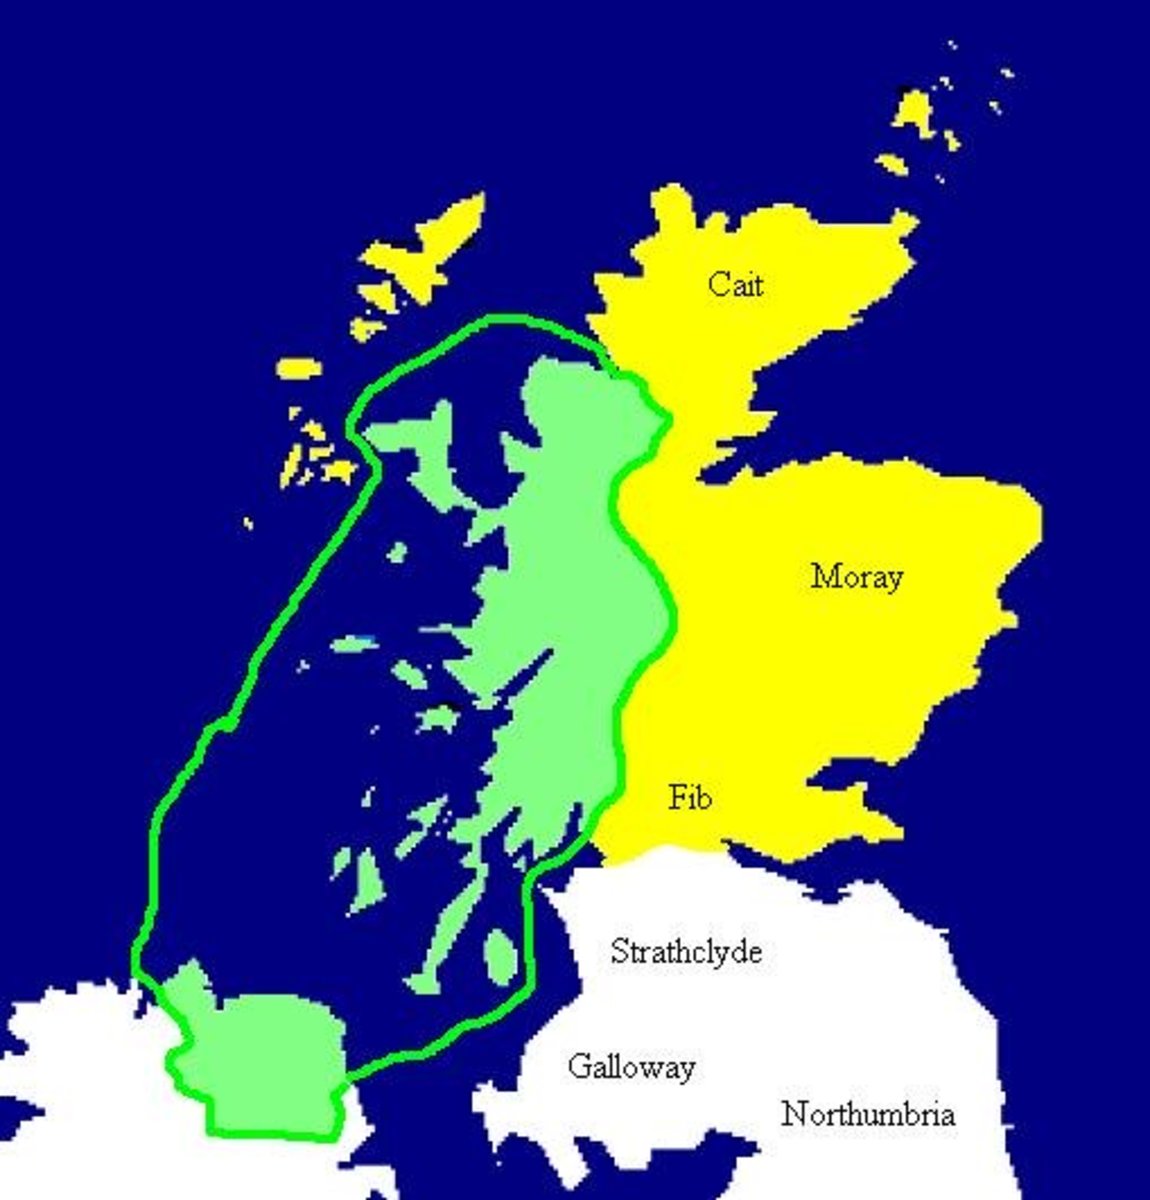 The Kingdom of Dalriada c 500 AD is marked in green. Pictish areas marked yellow. 